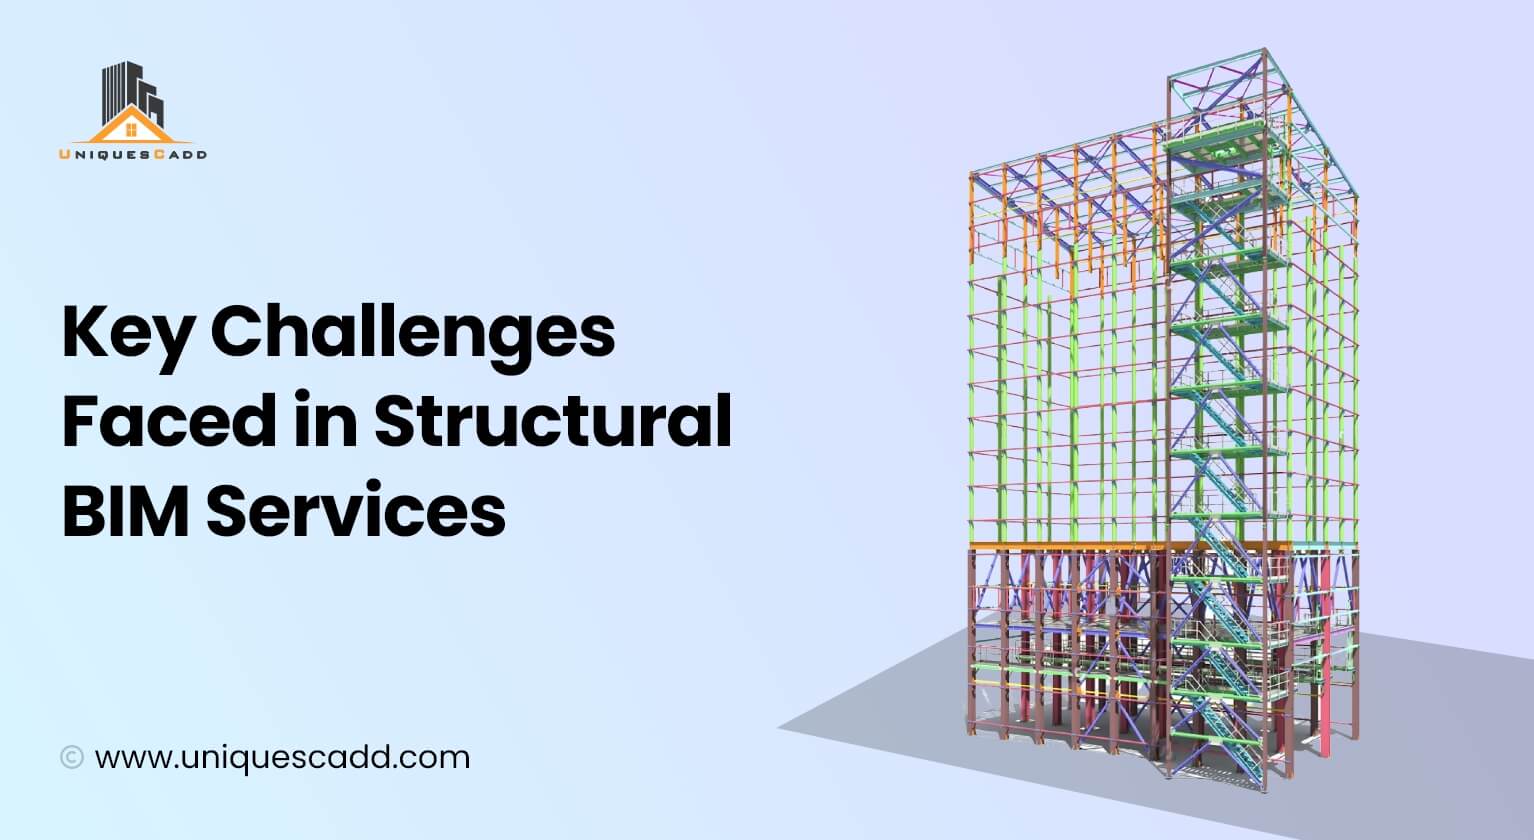 Key Challenges Faced in Structural BIM Services